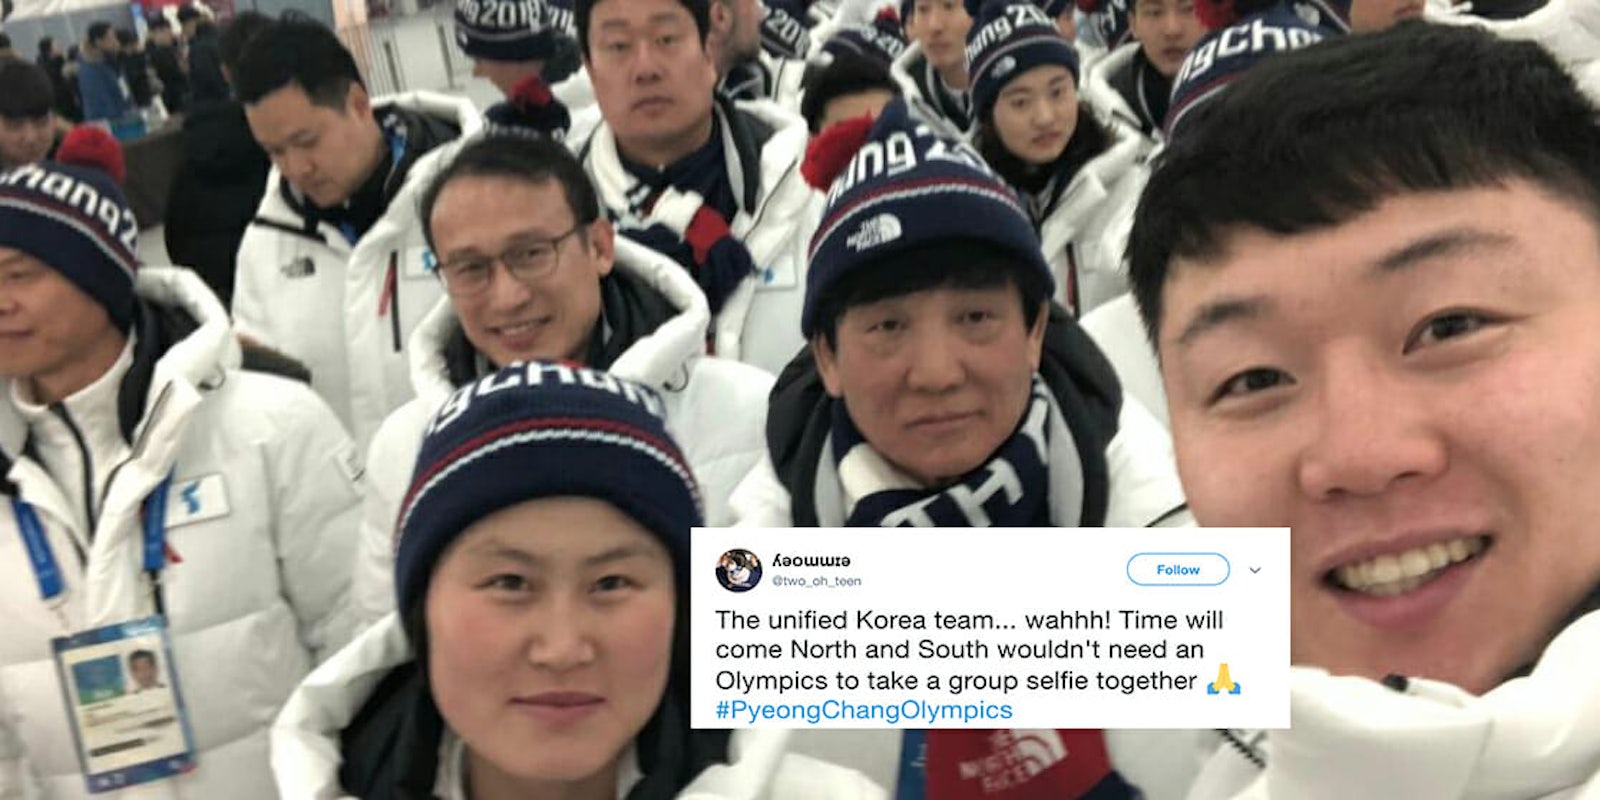 North and South Korean athletes took a selfie together at the Winter Olympics.